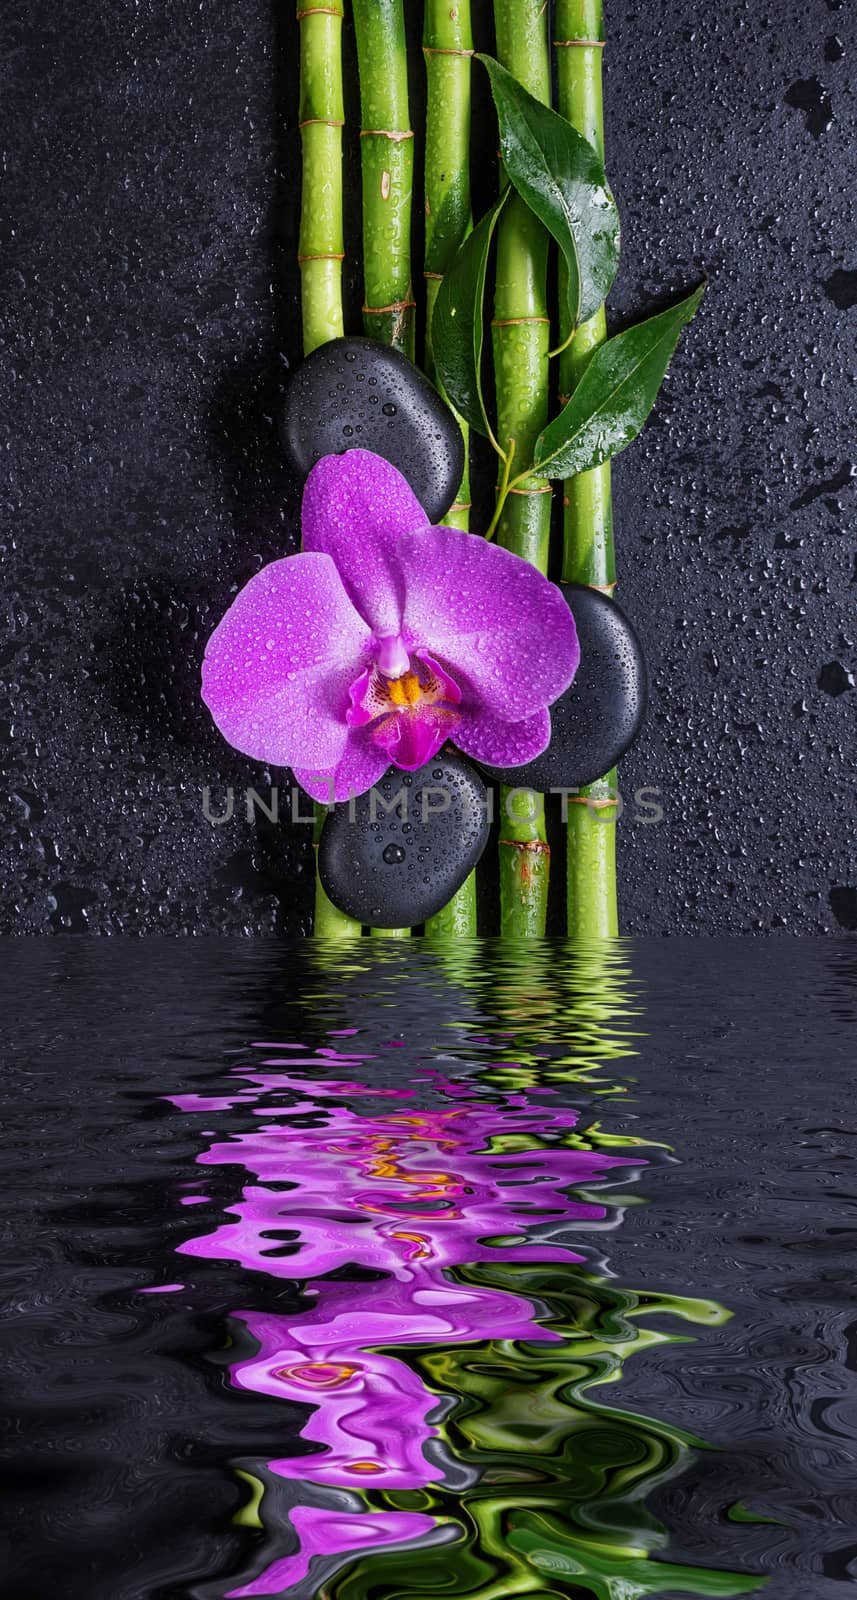 Spa concept with black basalt massage stones, pink orchid flower and a few stems of Lucky bamboo covered with water drops on a black background, reflected in the water surface with small waves